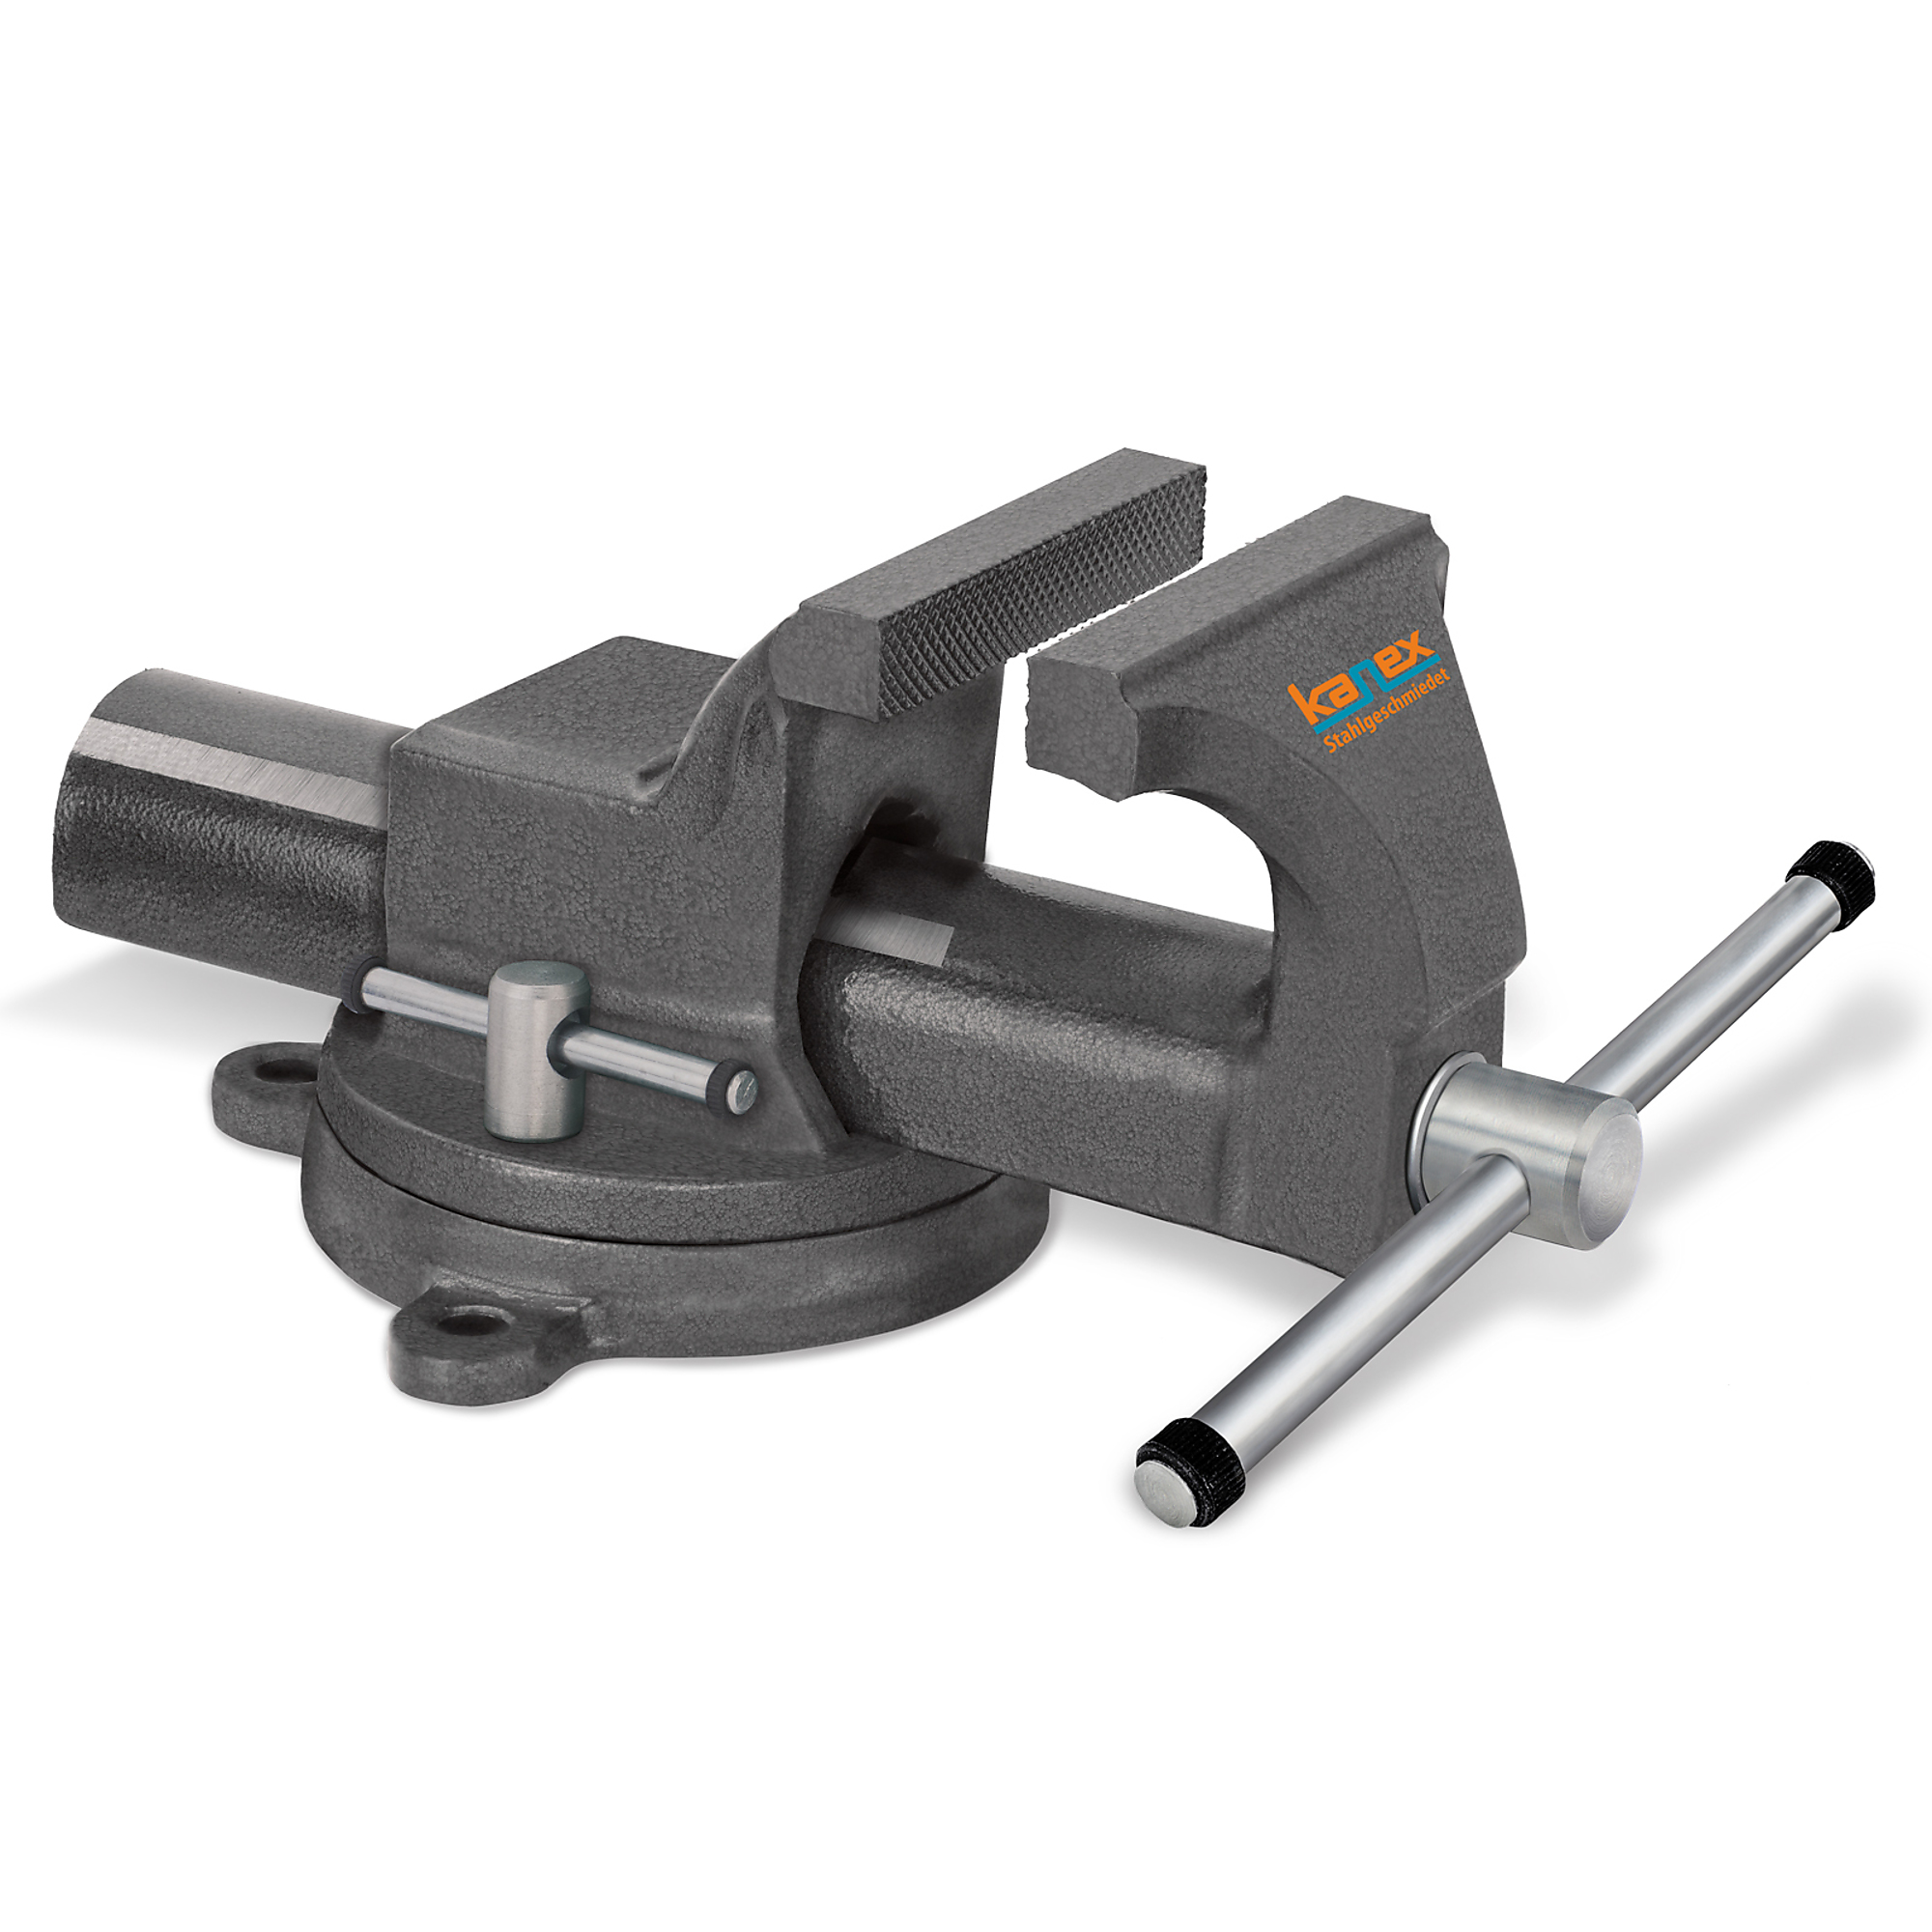 KANCA, KANEX BENCH VISE WITH SWIVEL BASE 150 MM - 6Inch, Jaw Width 6 in, Jaw Capacity 7 in, Model Kanex Bench Vise